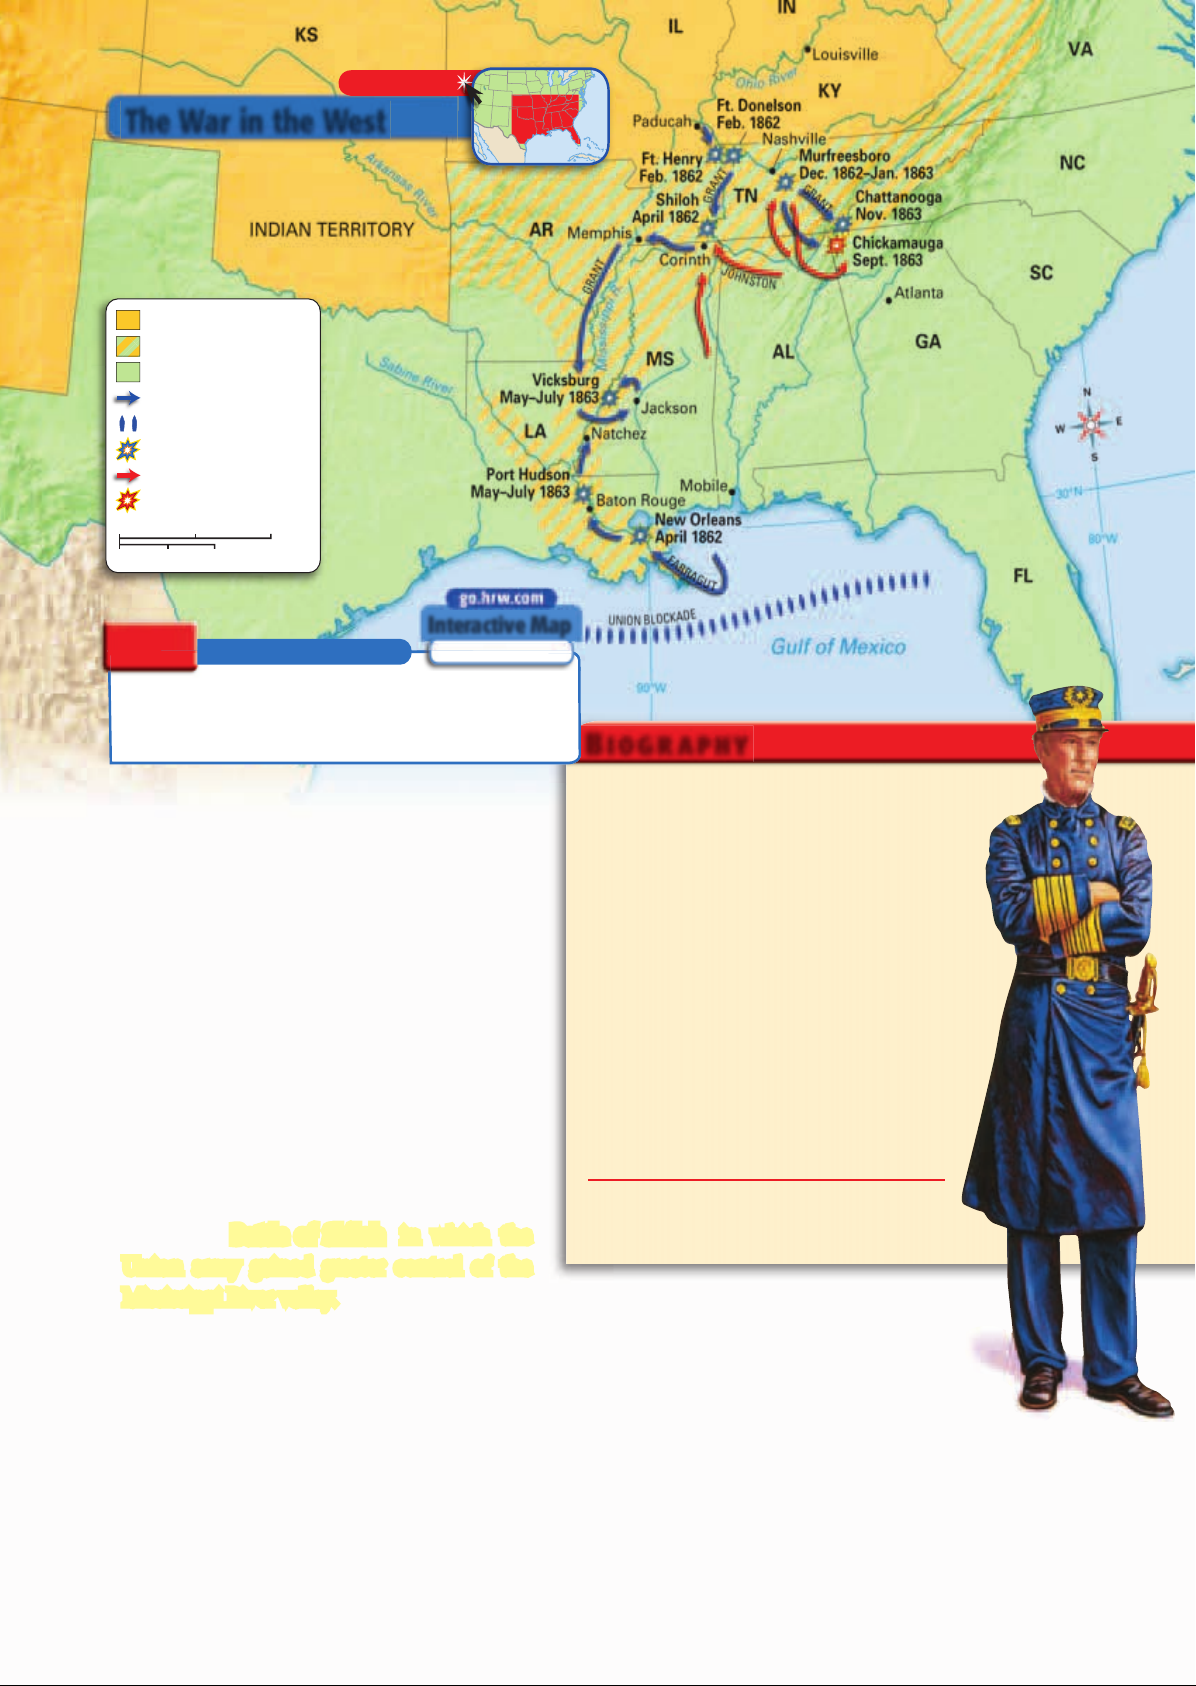 US_History_Textbook_8th_Grade_Chapter_15_The_Civil_War_h0BNFyV Image-15